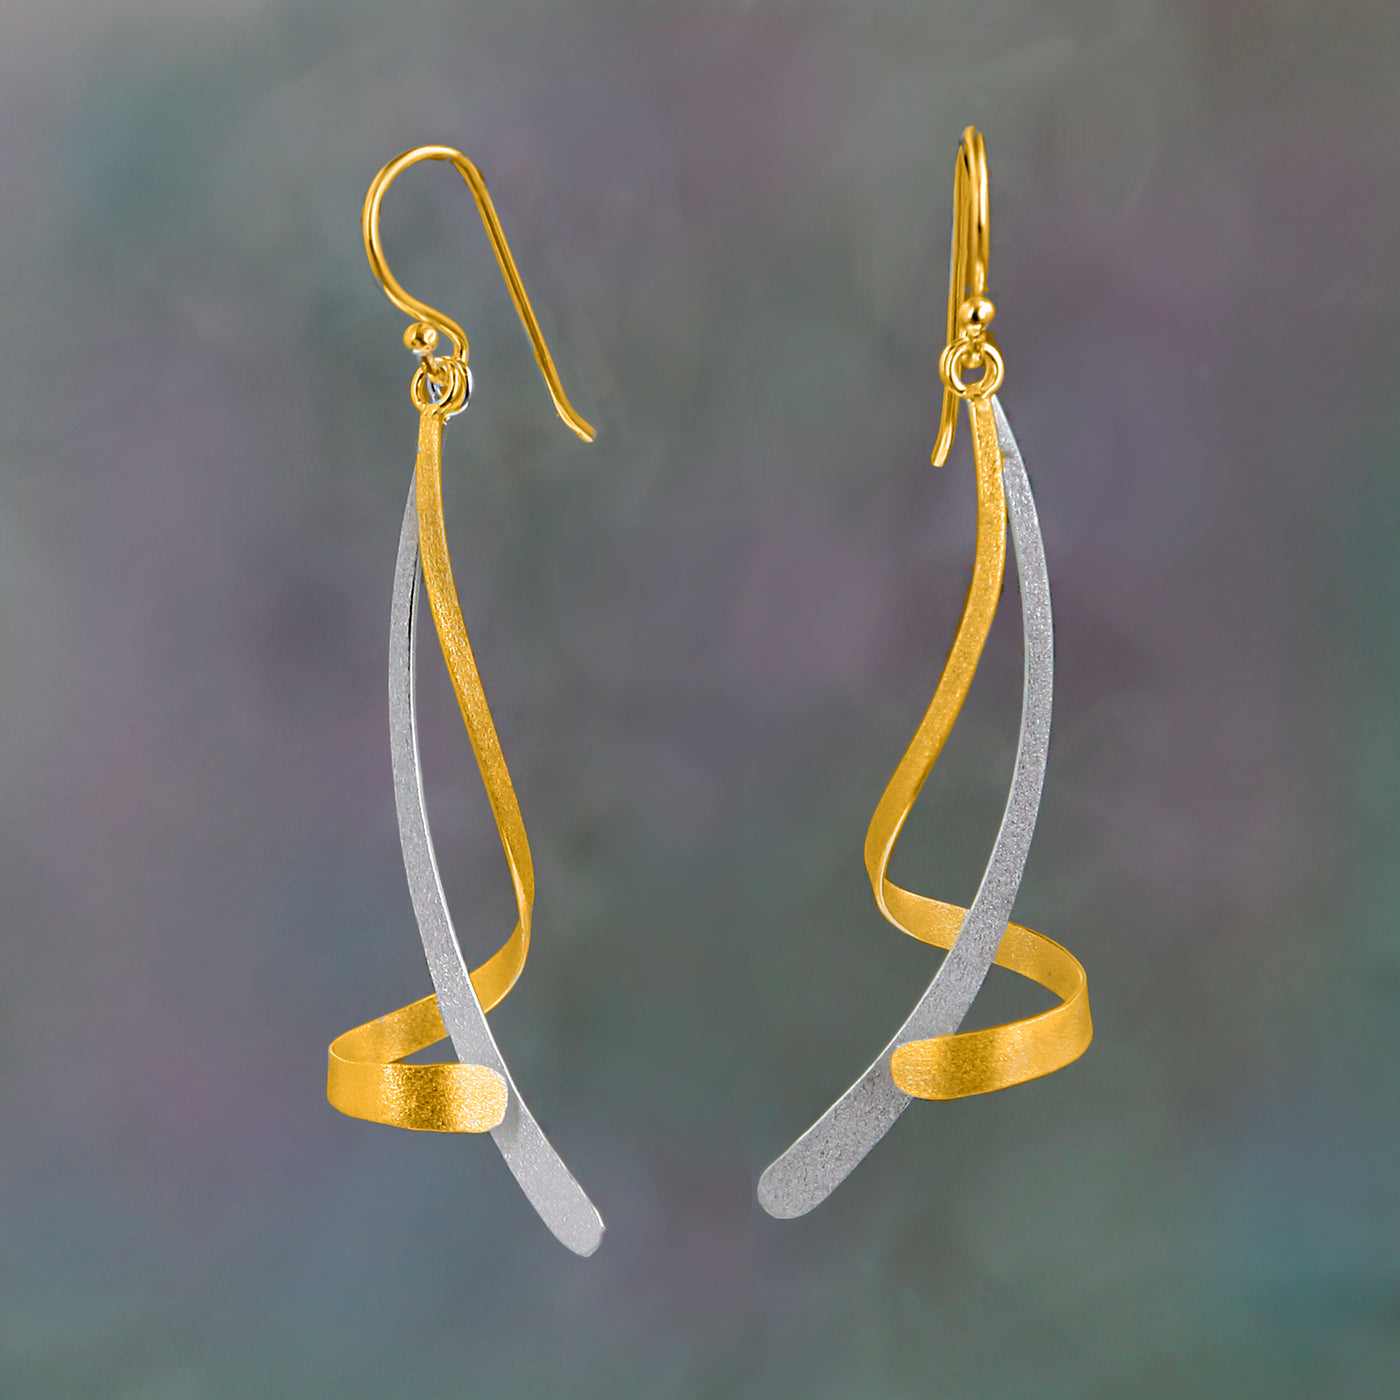 Twist & Turn Gold and Silver Earrings